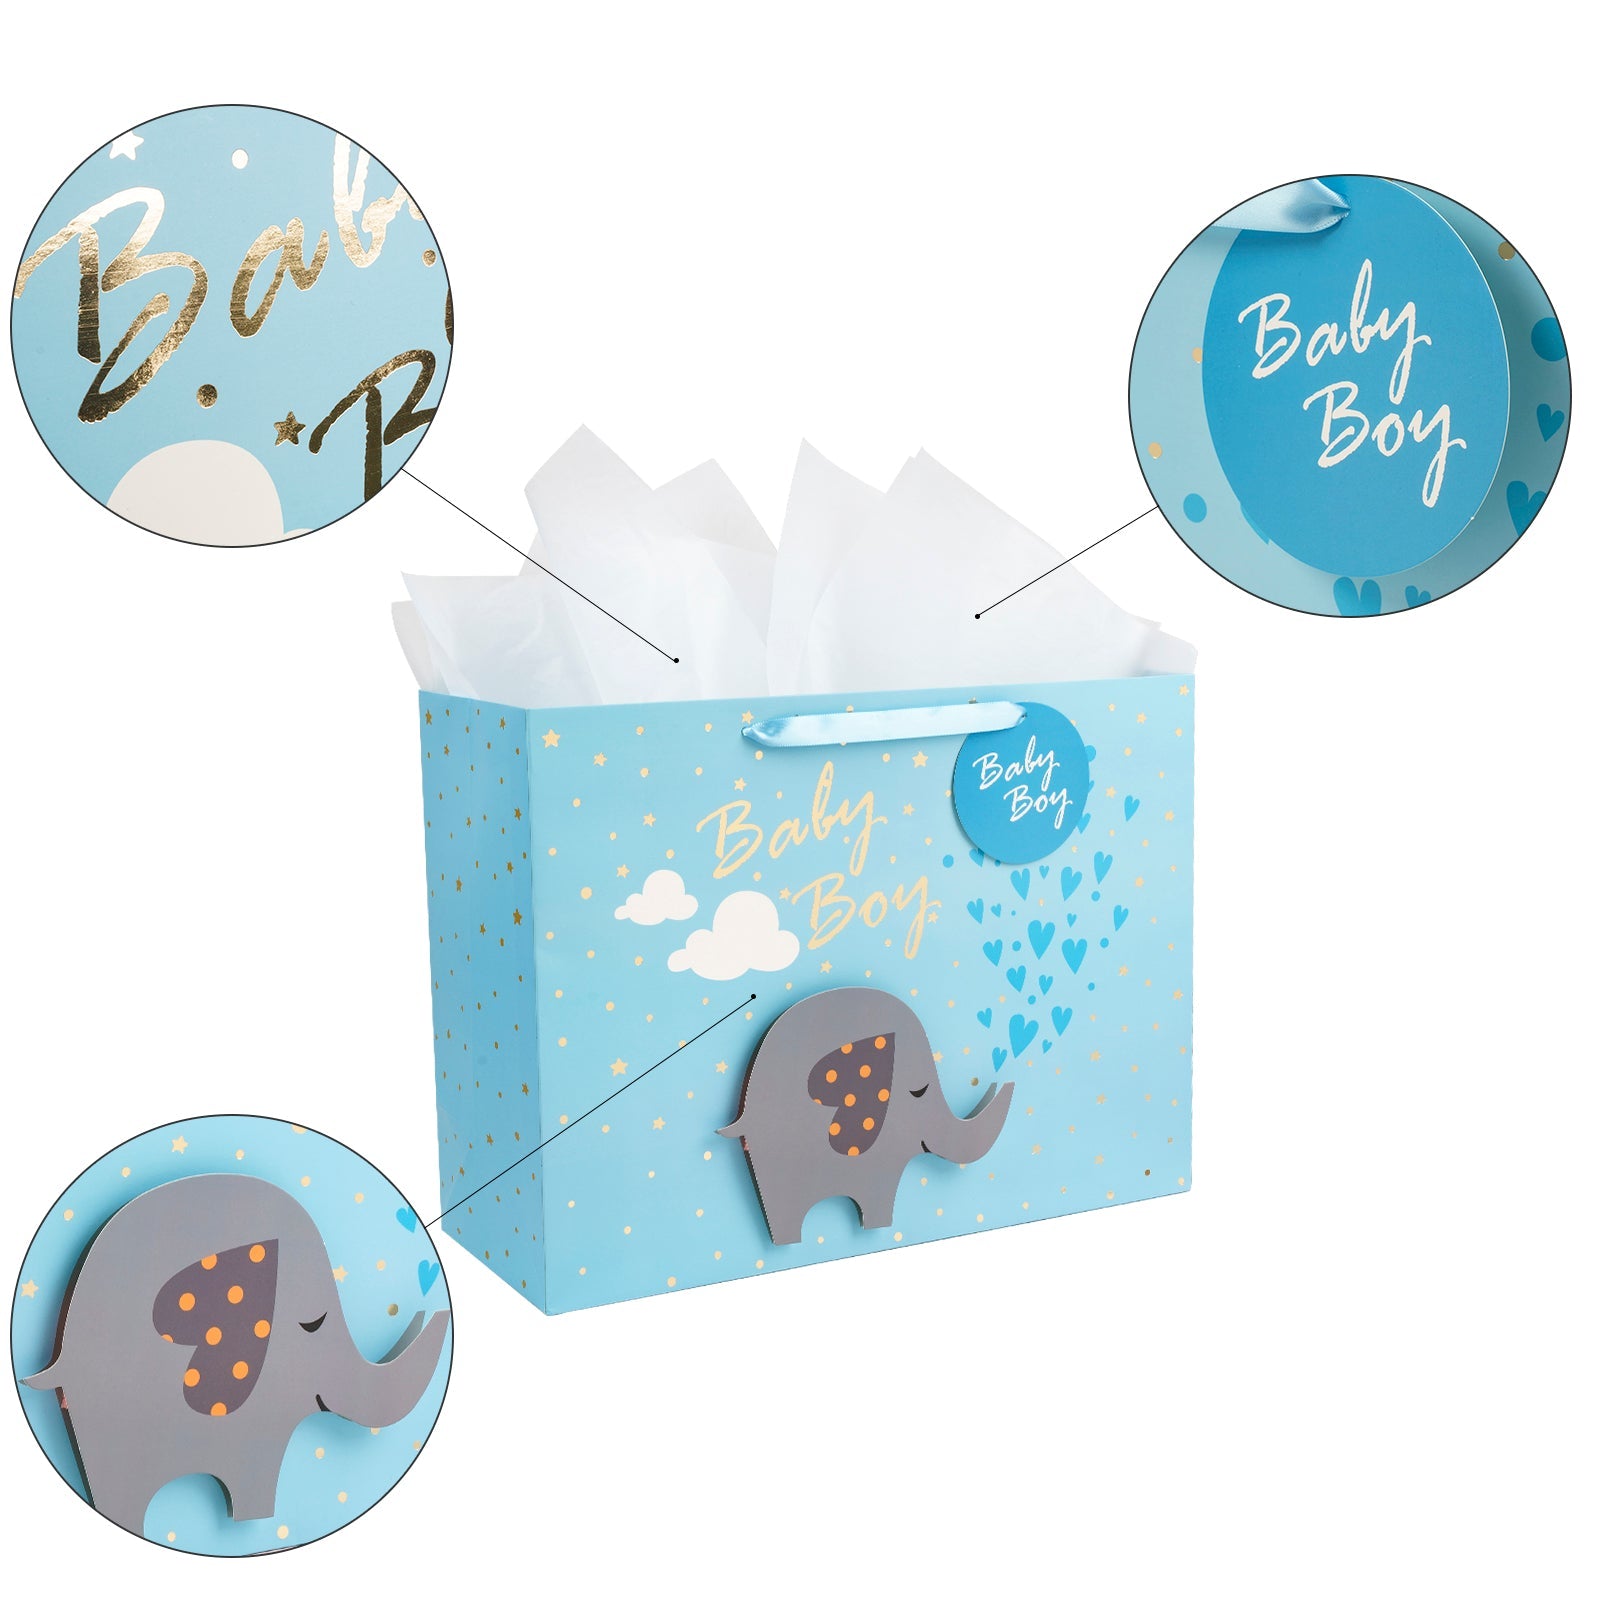 16 inch Extra Large Gift Bag with Gift Card  & Tissue Paper - Baby Boy 3D Making Design